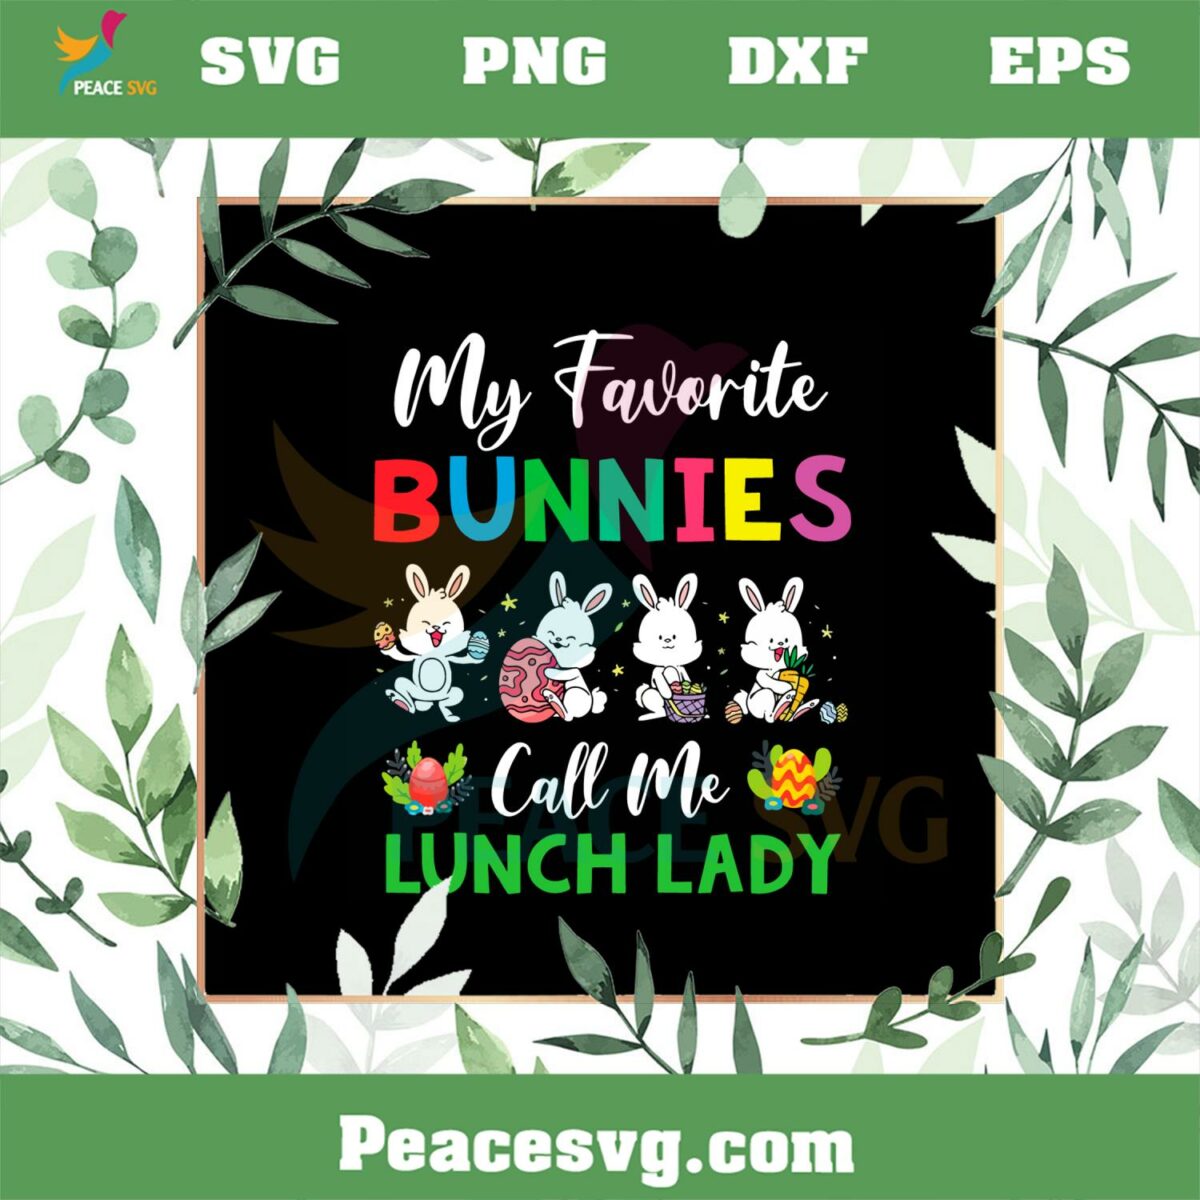 My Favorite Bunnies Call Me Lunch Lady Funny Easter SVG Cutting Files